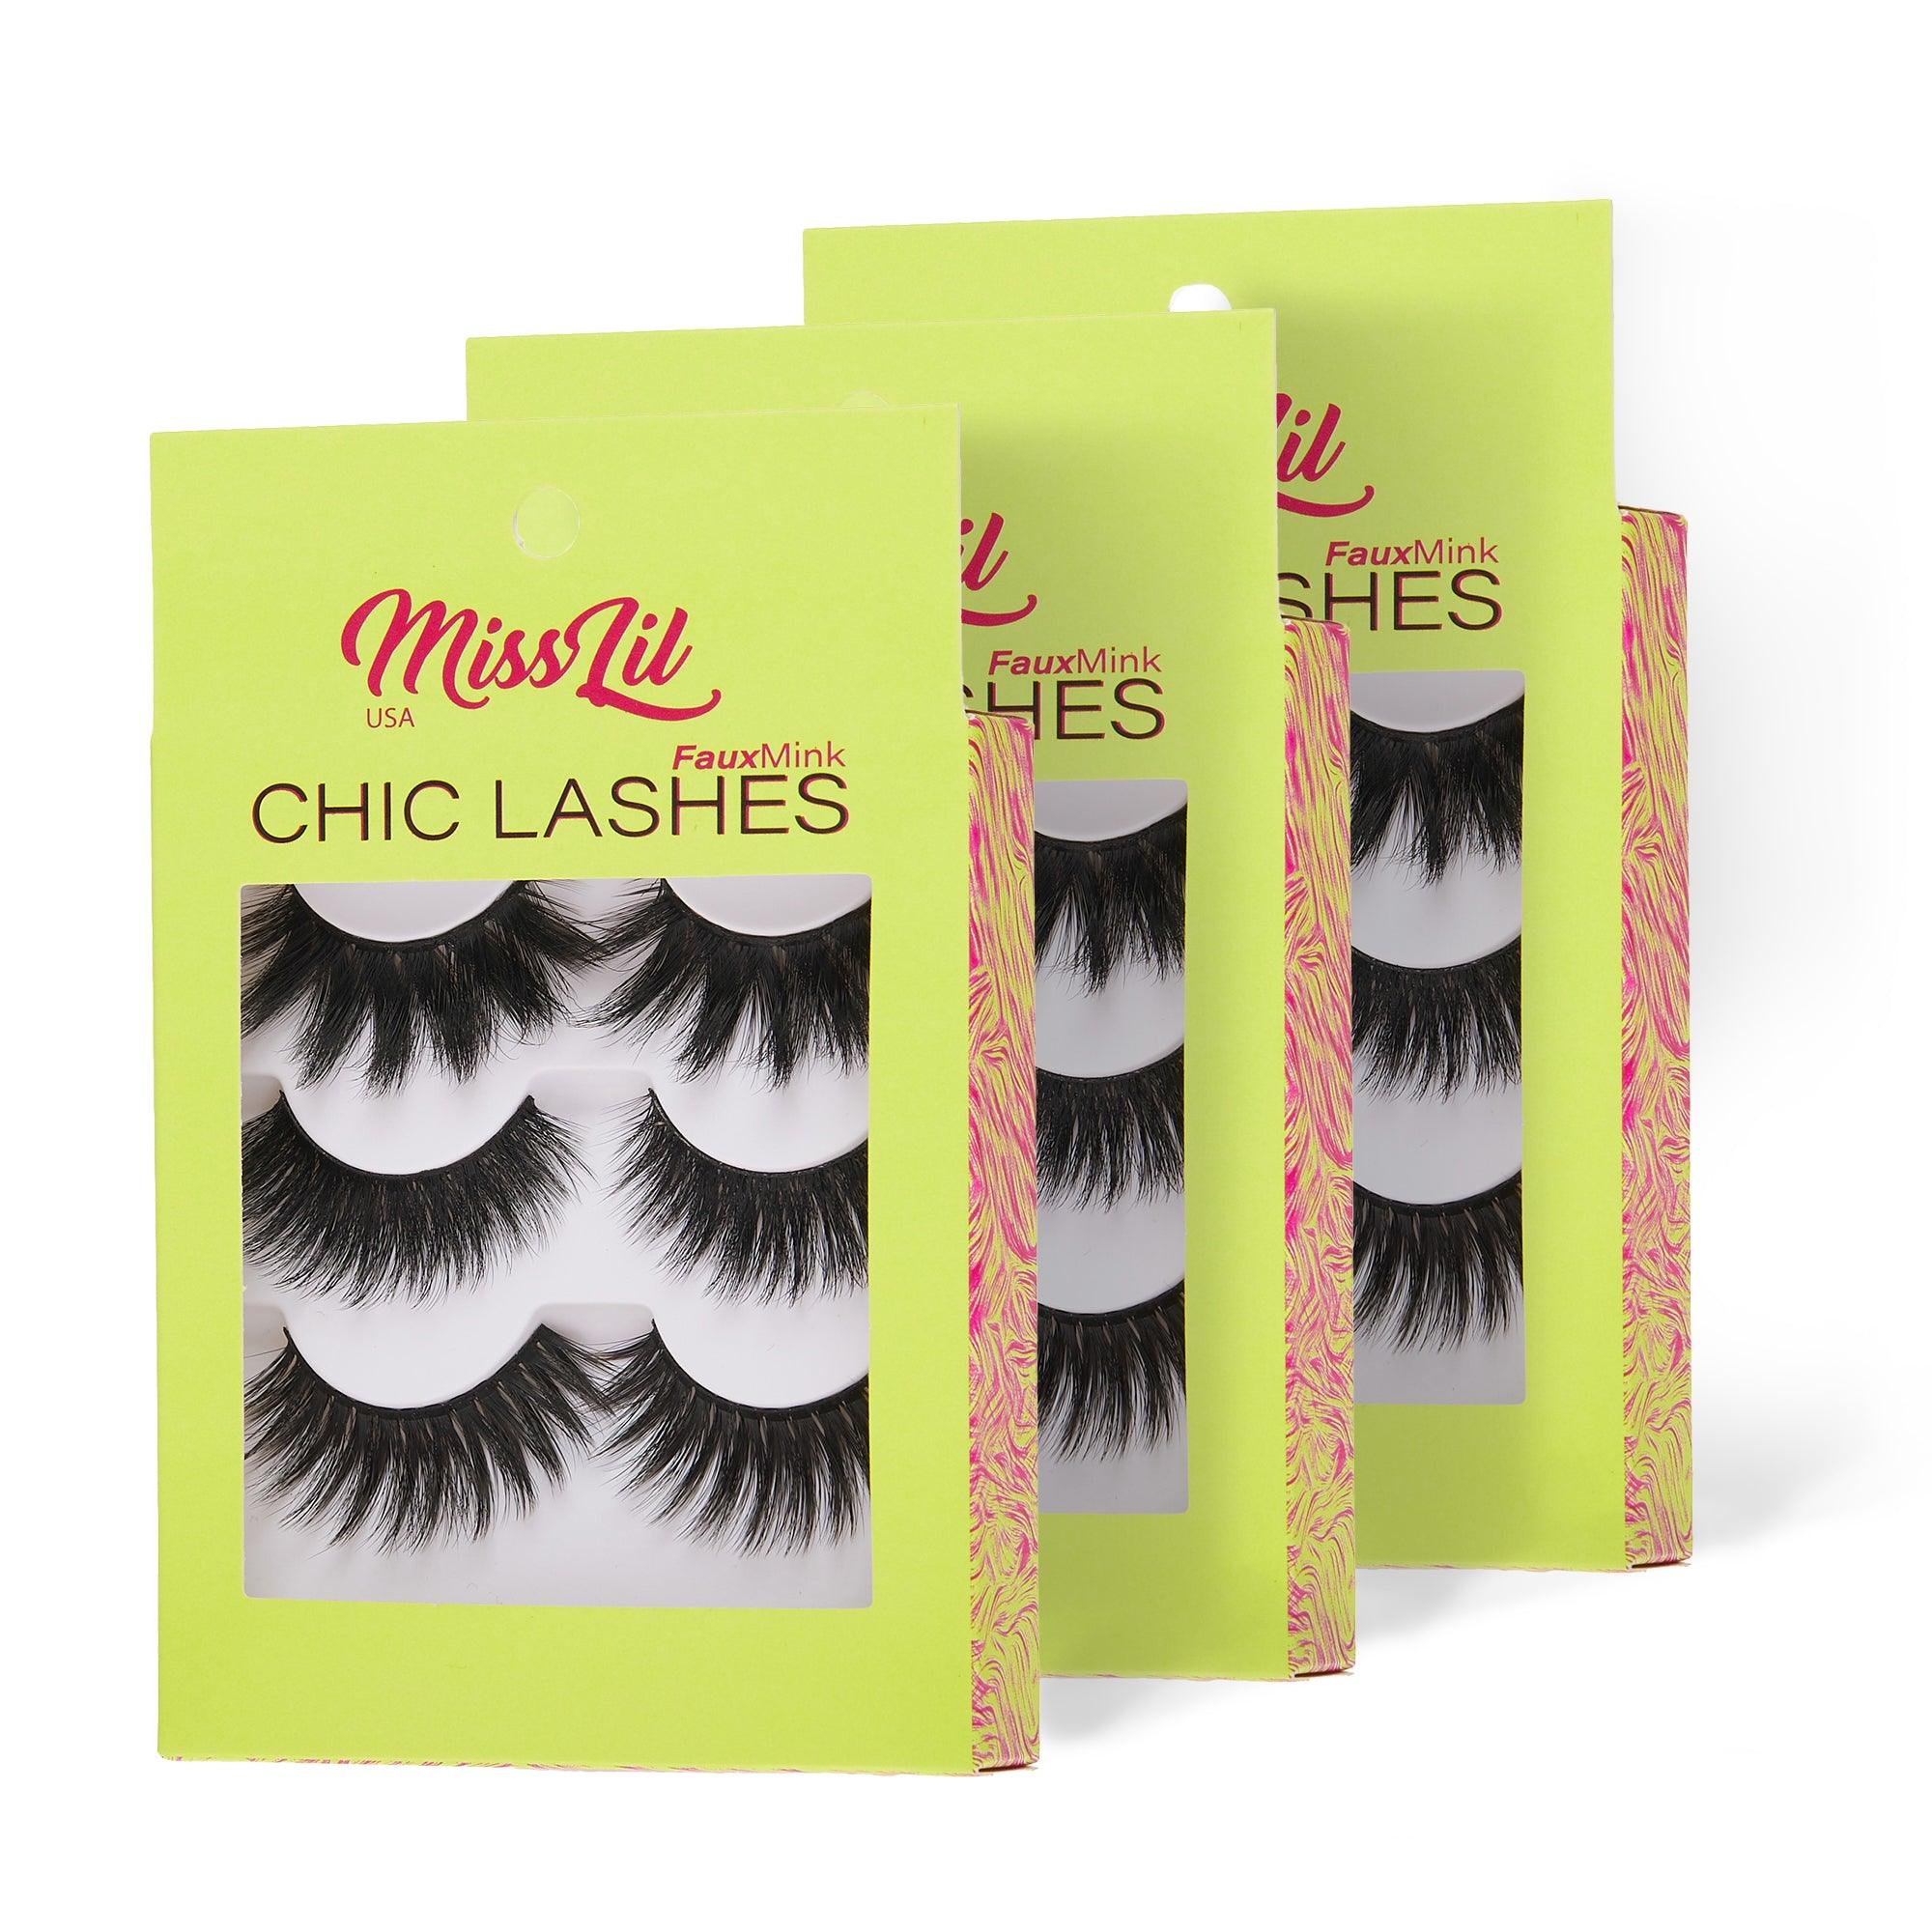 3-Pair Faux Mink Eyelashes - Chic Lashes Collection #26 - Pack of 3 - Miss Lil USA